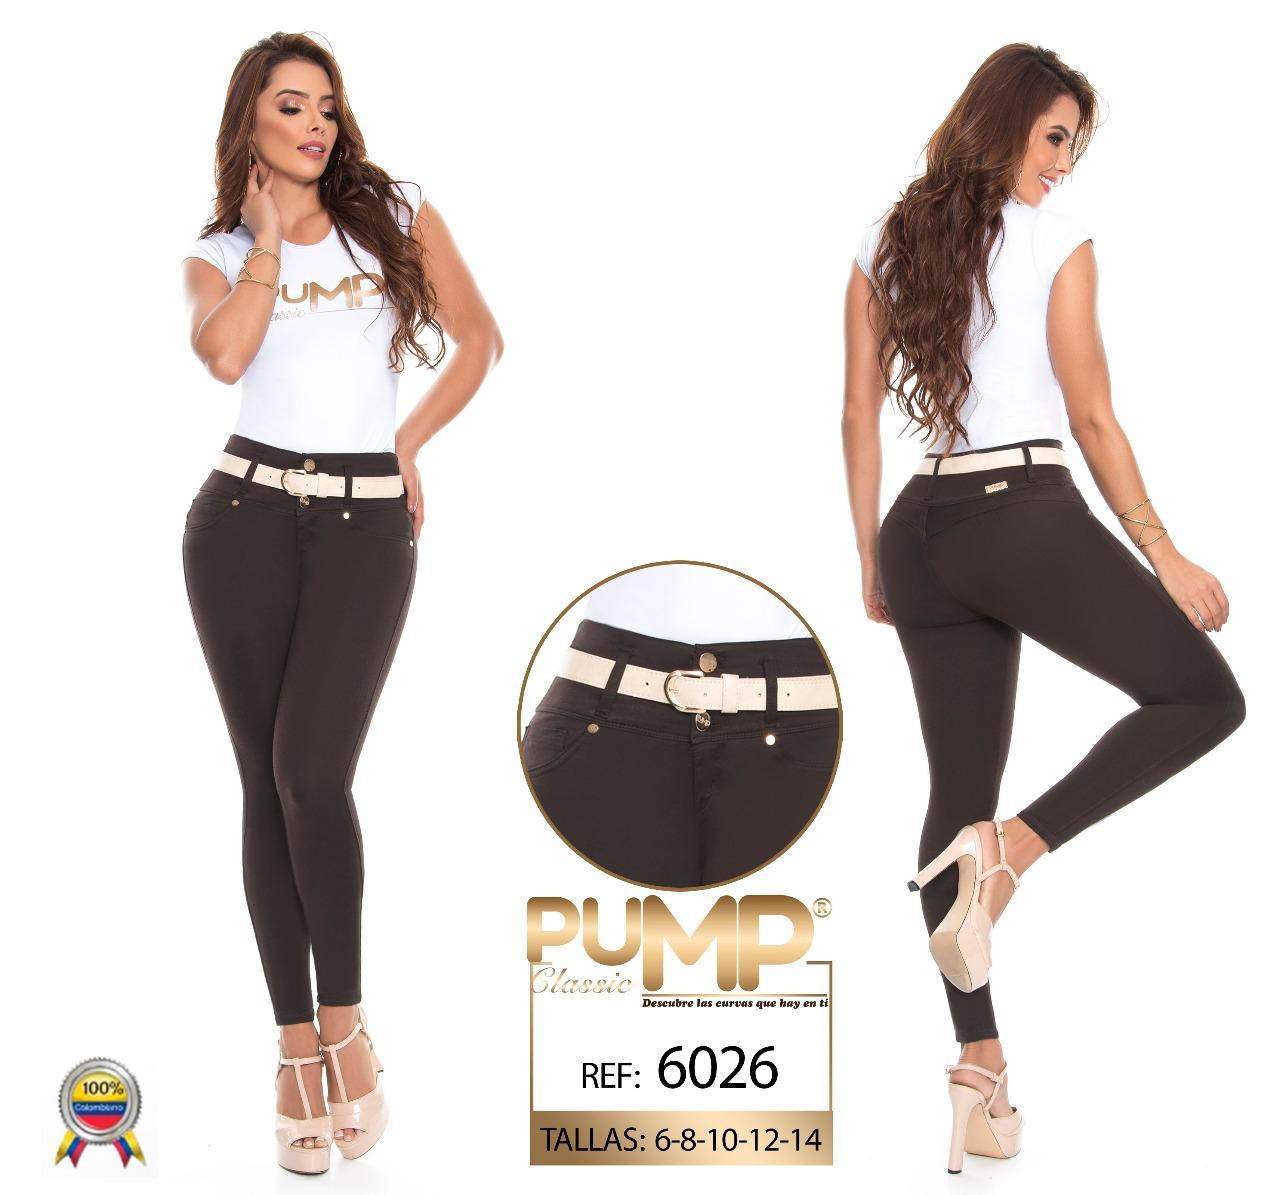 Original Push Up Jeans Colombianos